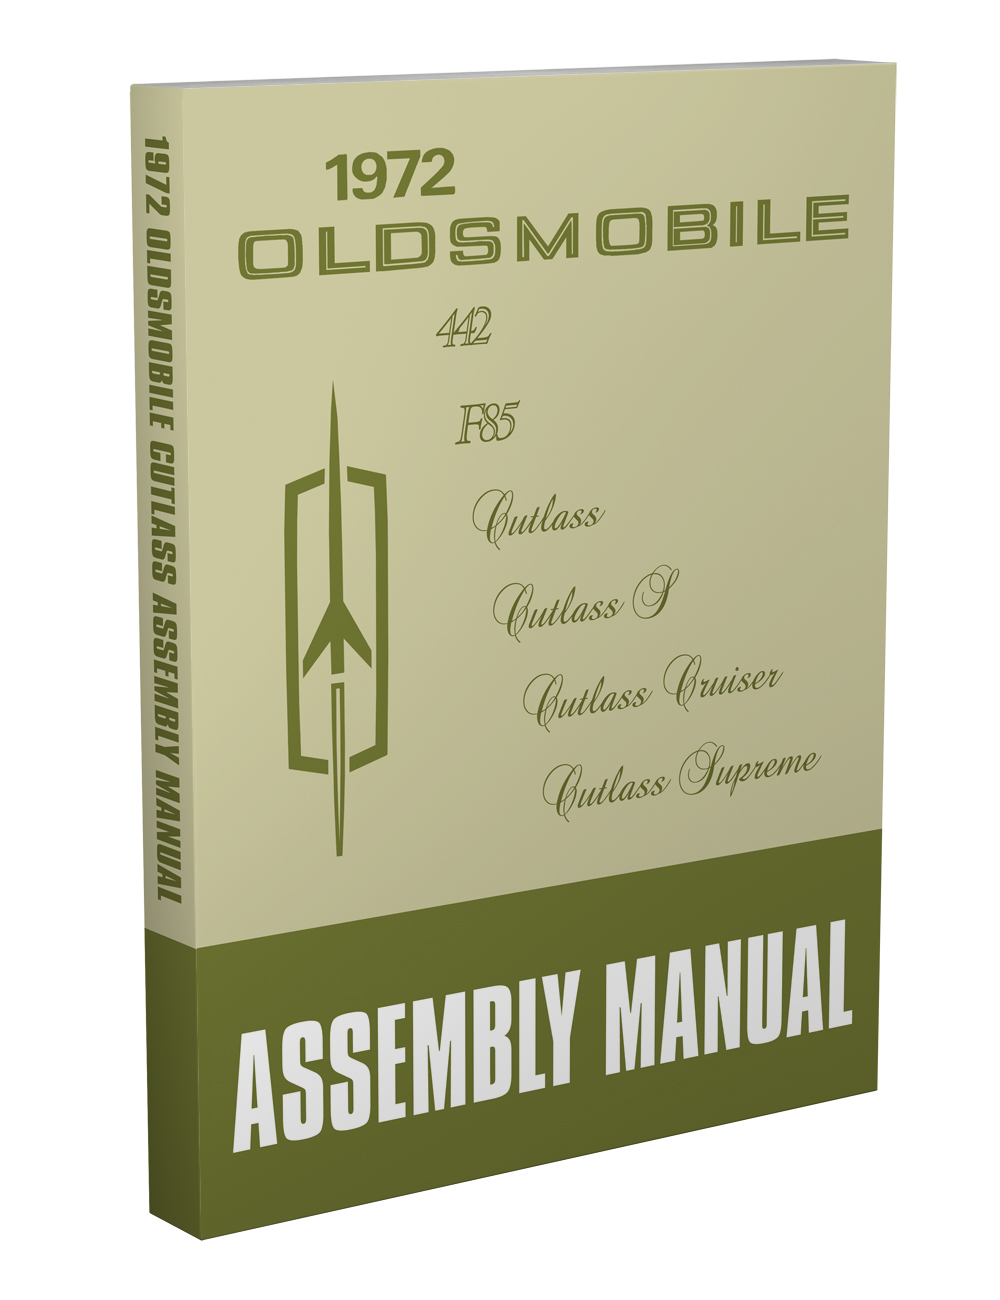 1972 Oldsmobile Assembly Manual Olds 442 F85 Cutlass S Cruiser Supreme Reprint 